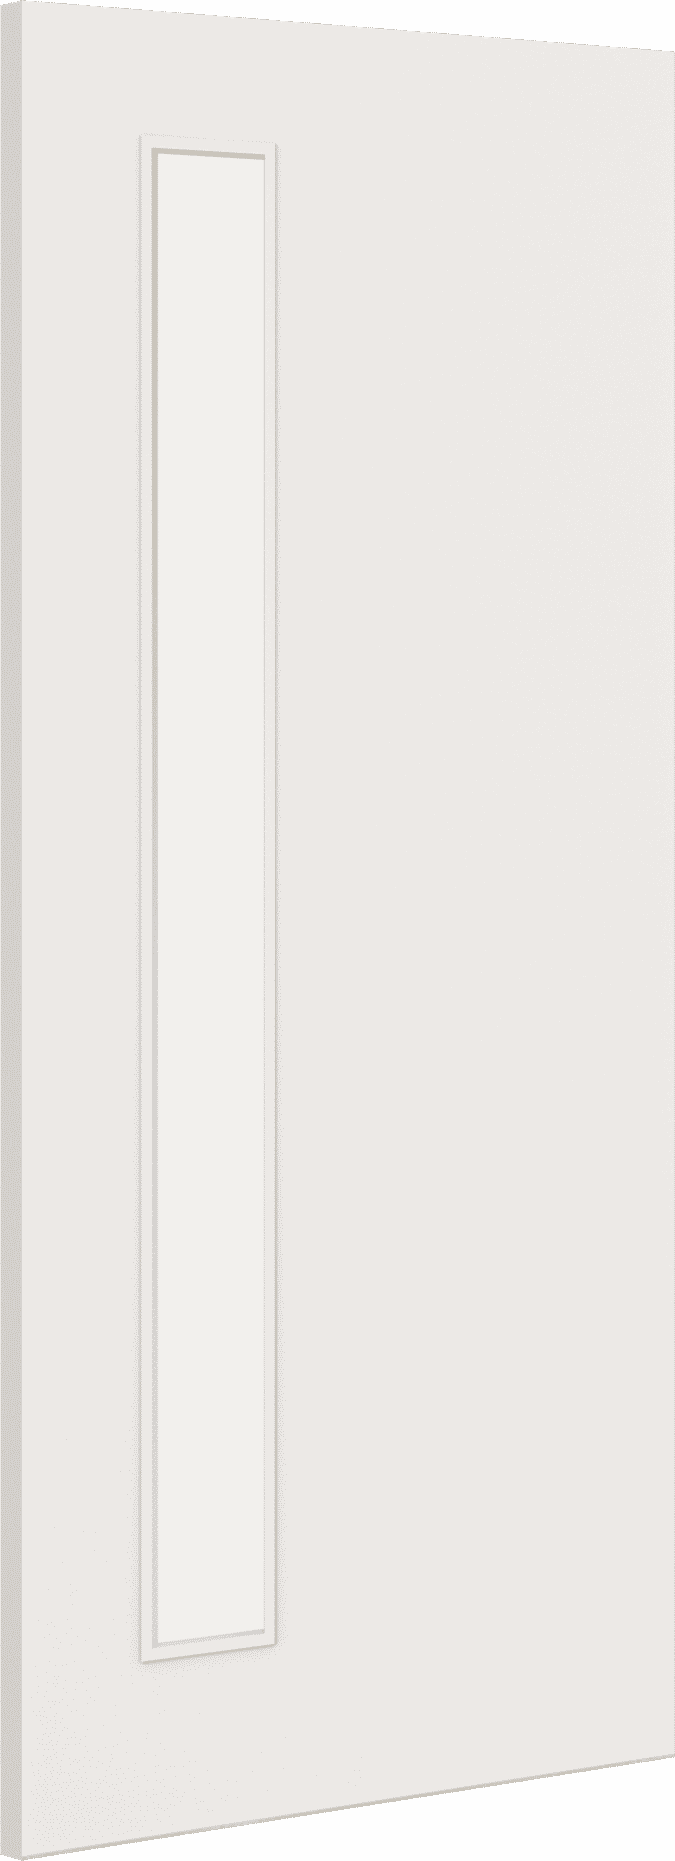 1981mm x 533mm x 44mm (21") Architectural Paint Grade White 06 Clear Glazed Fire Door Blank